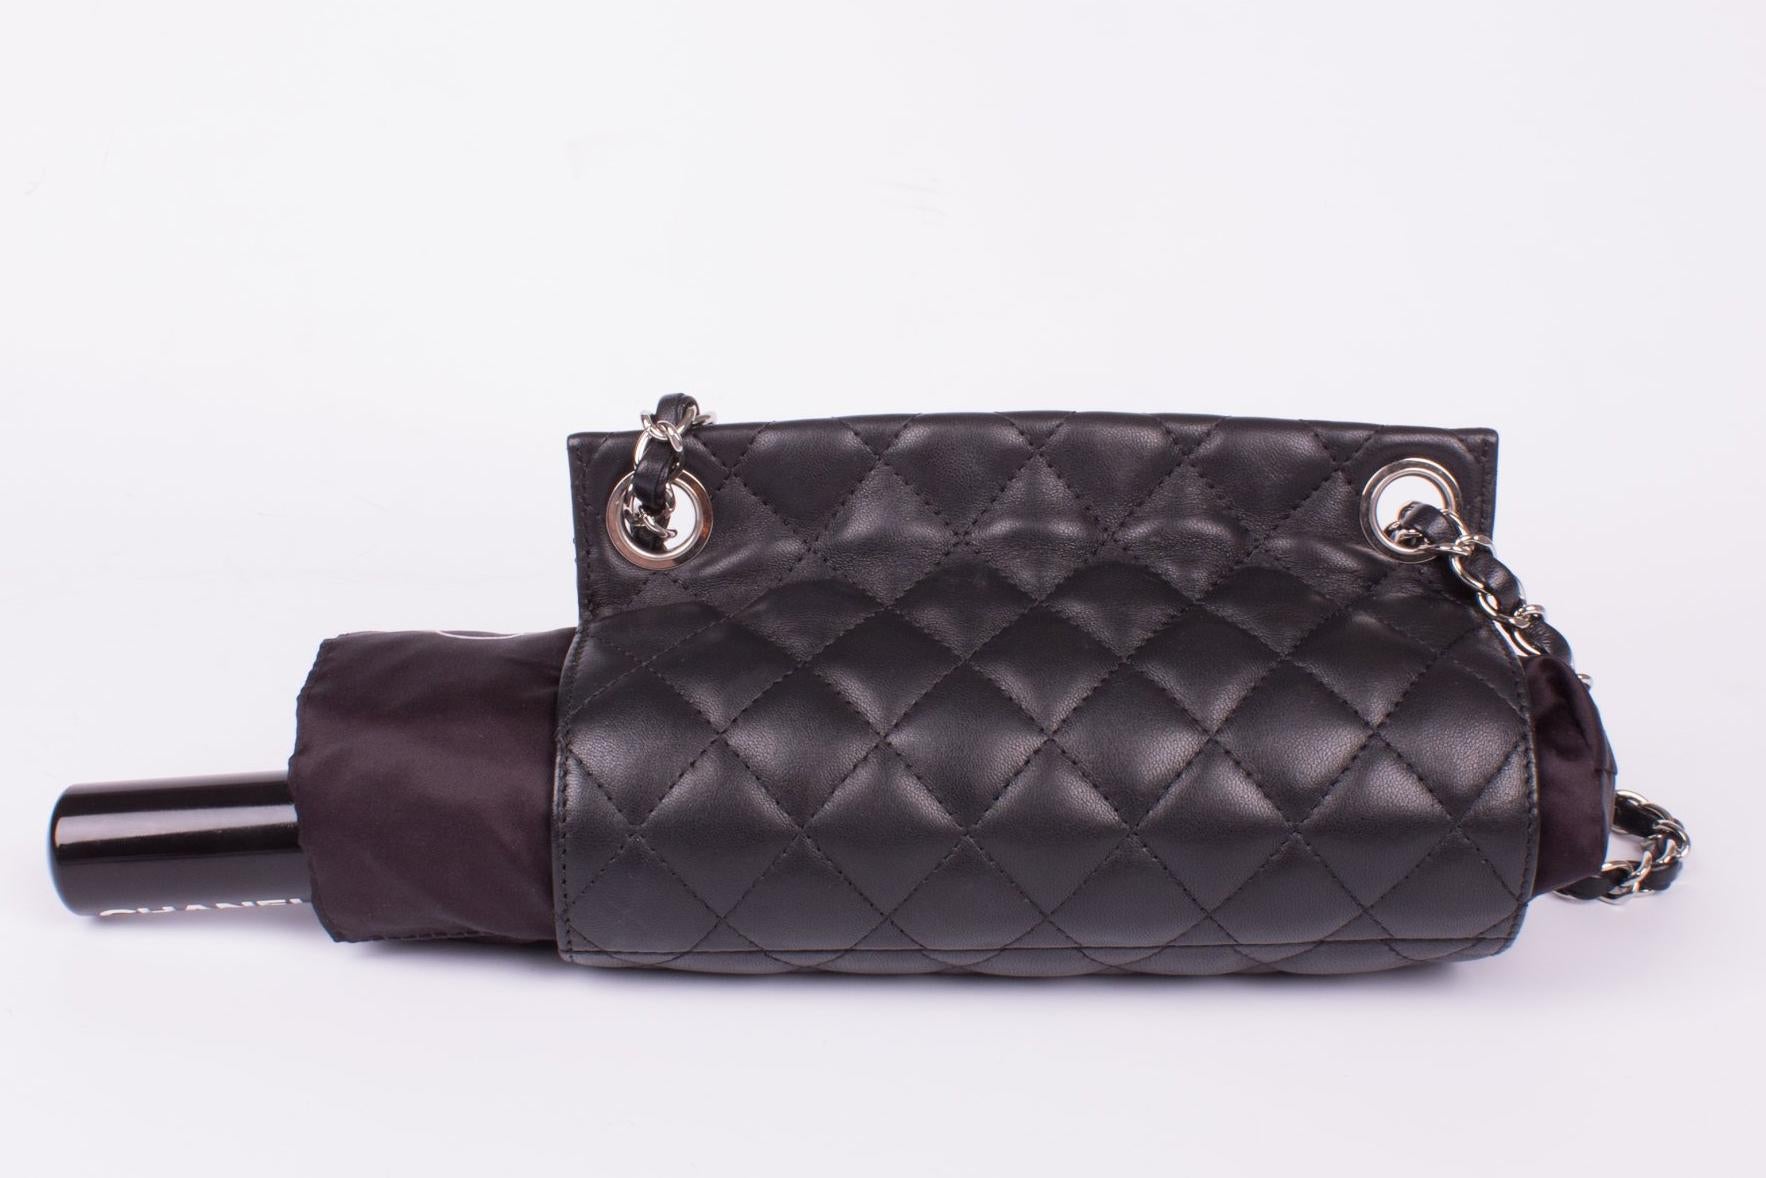 Carry your umbrella in style! This is outrageous... we present the Chanel Umbrella Case Single Flap Bag with a Camellia umbrella.

This black lambskin leather quilted bag has the appearance of a single flap bag and has silvertone hardware. An